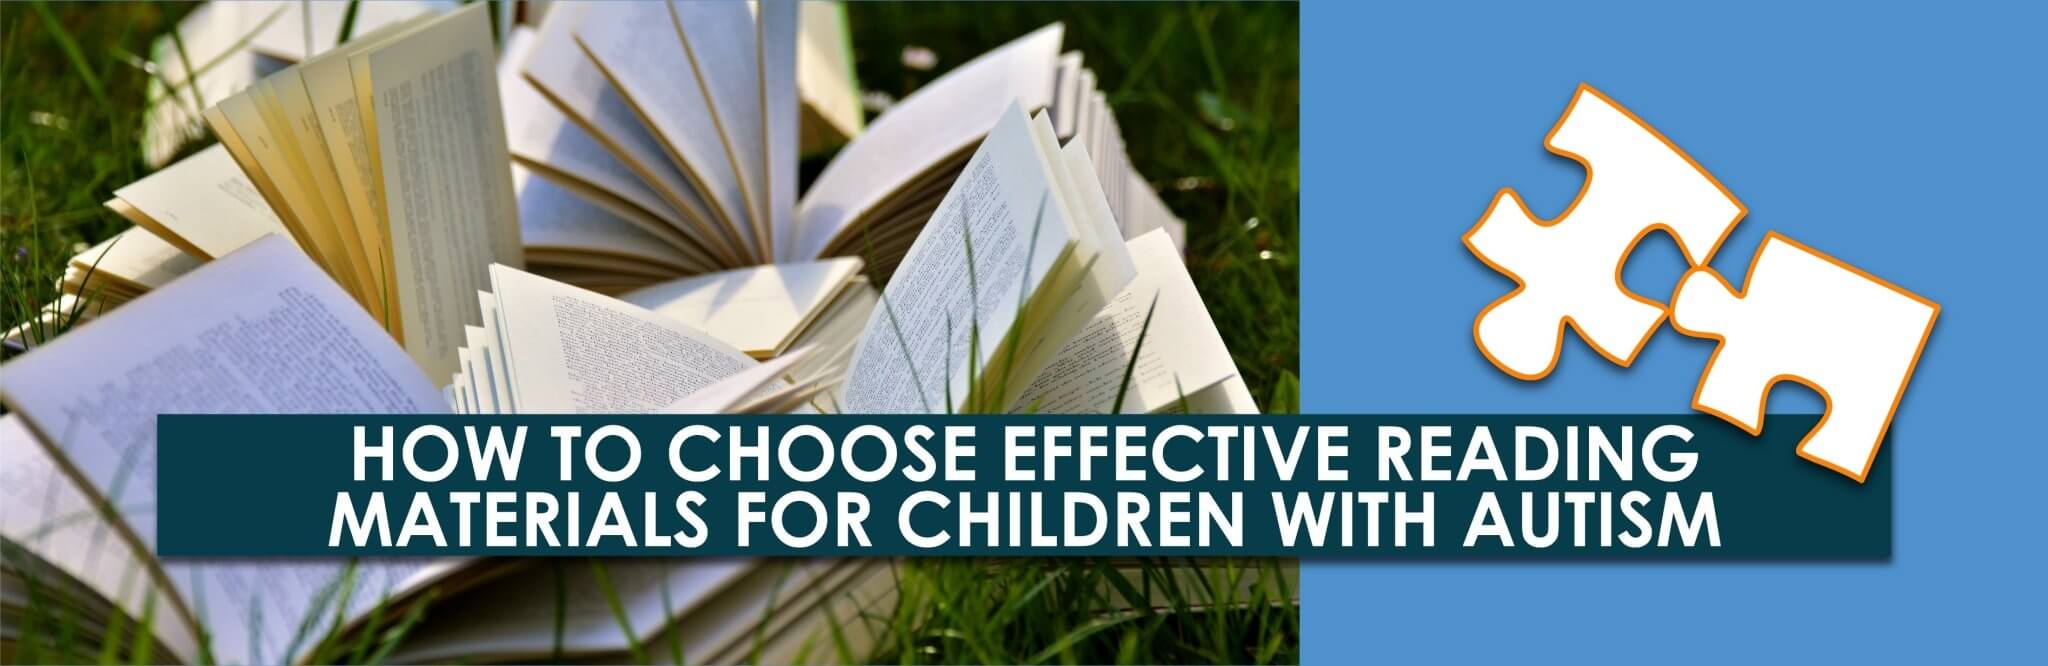 How to Choose Effective Reading Materials for Children With Autism